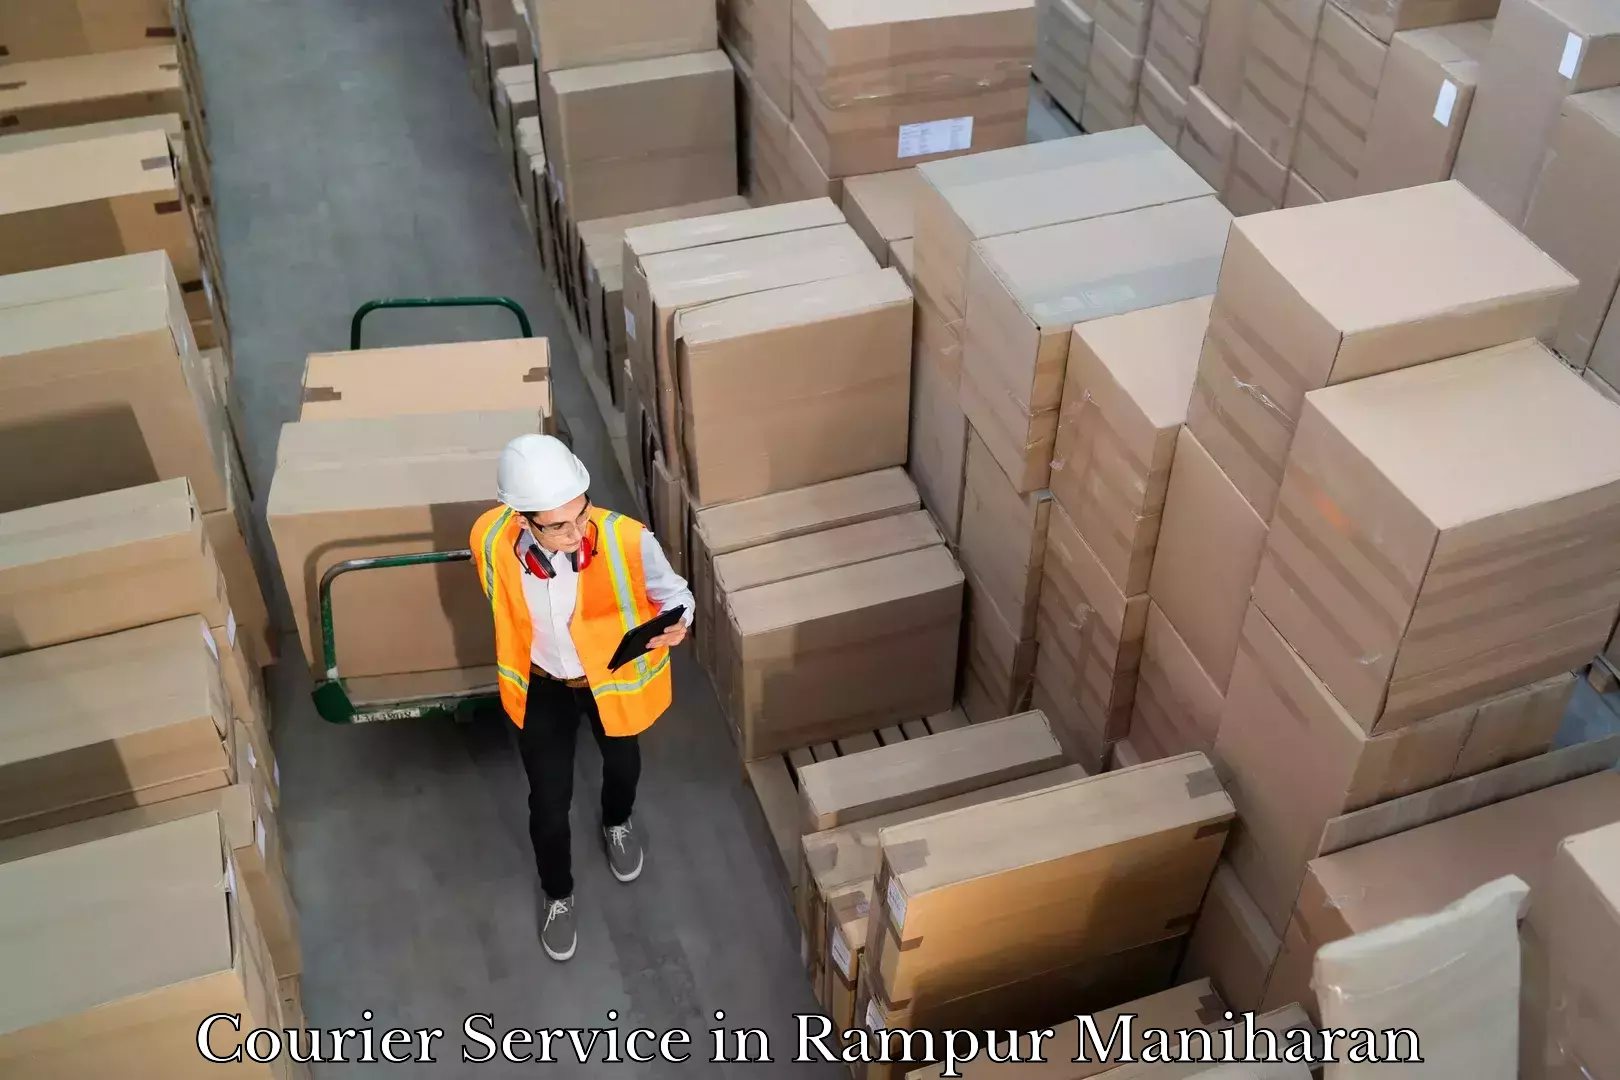 Advanced parcel tracking in Rampur Maniharan